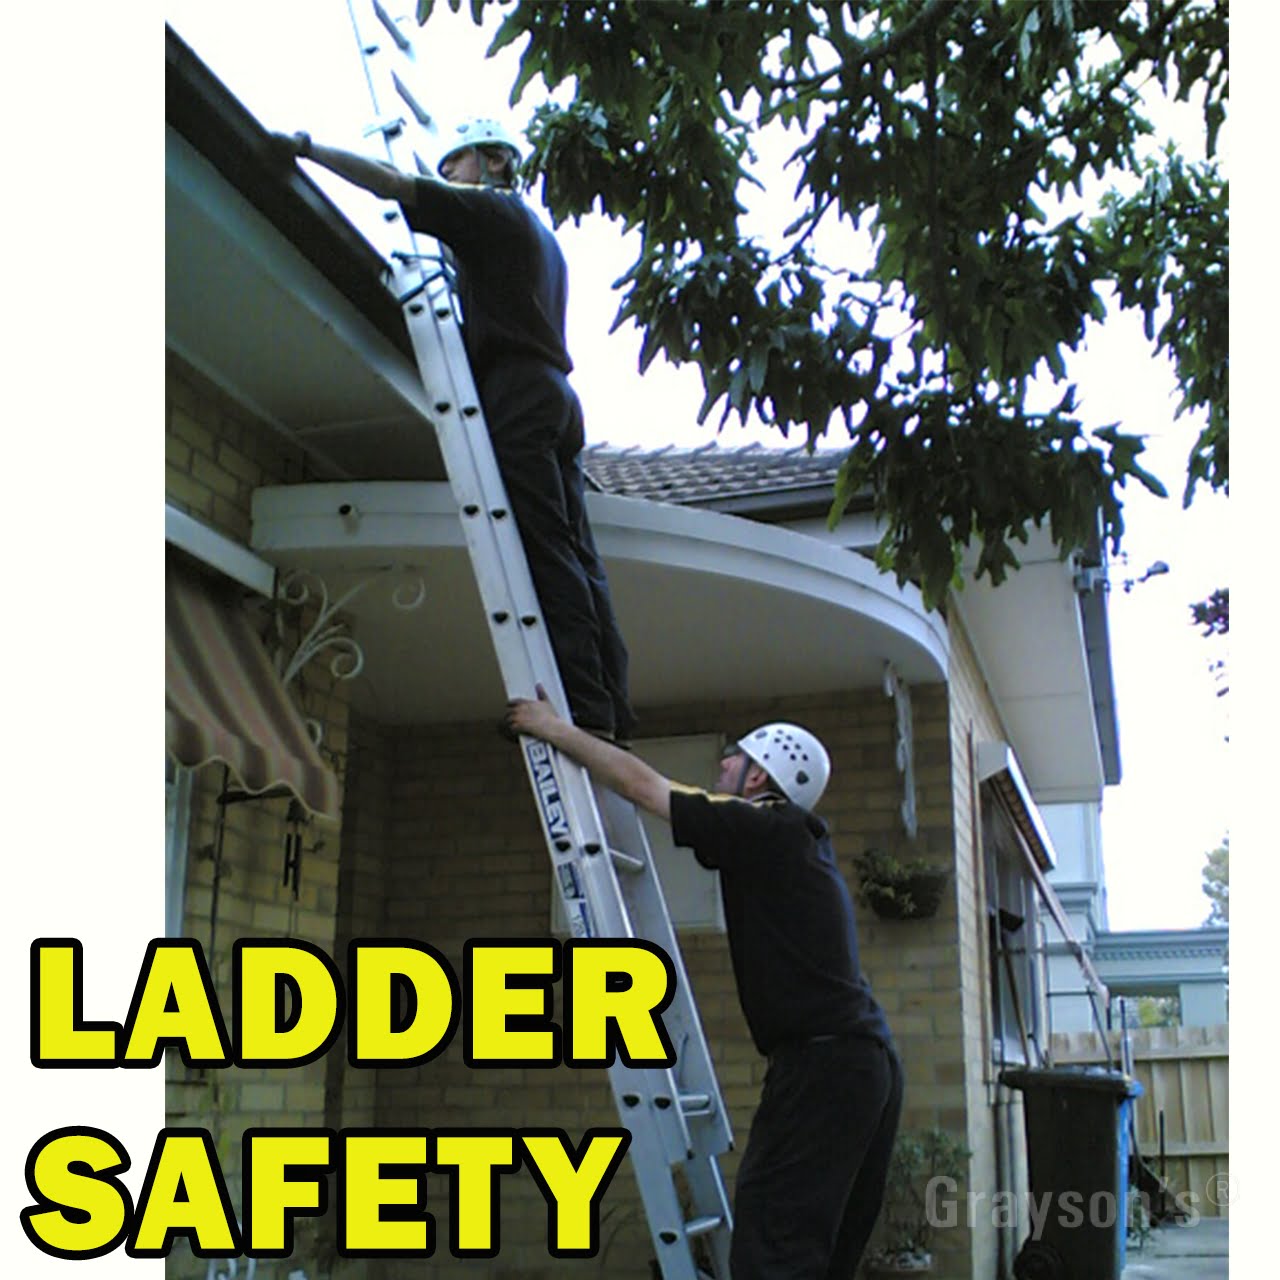 Ladder safety at work and home